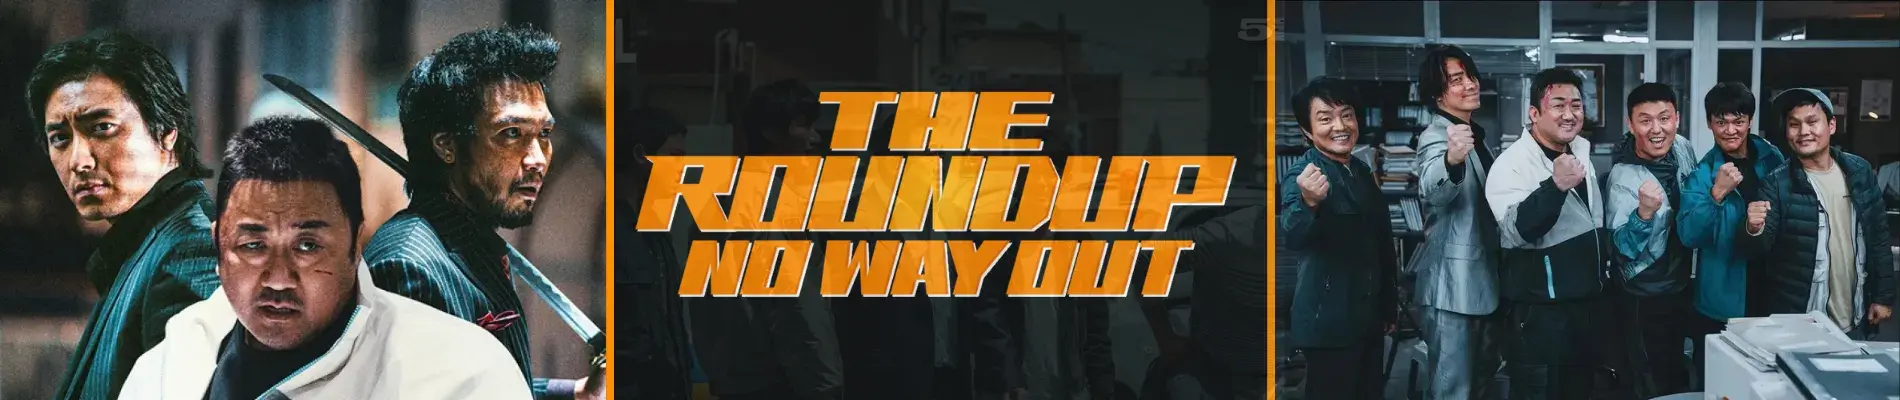 The Roundup No Way Out